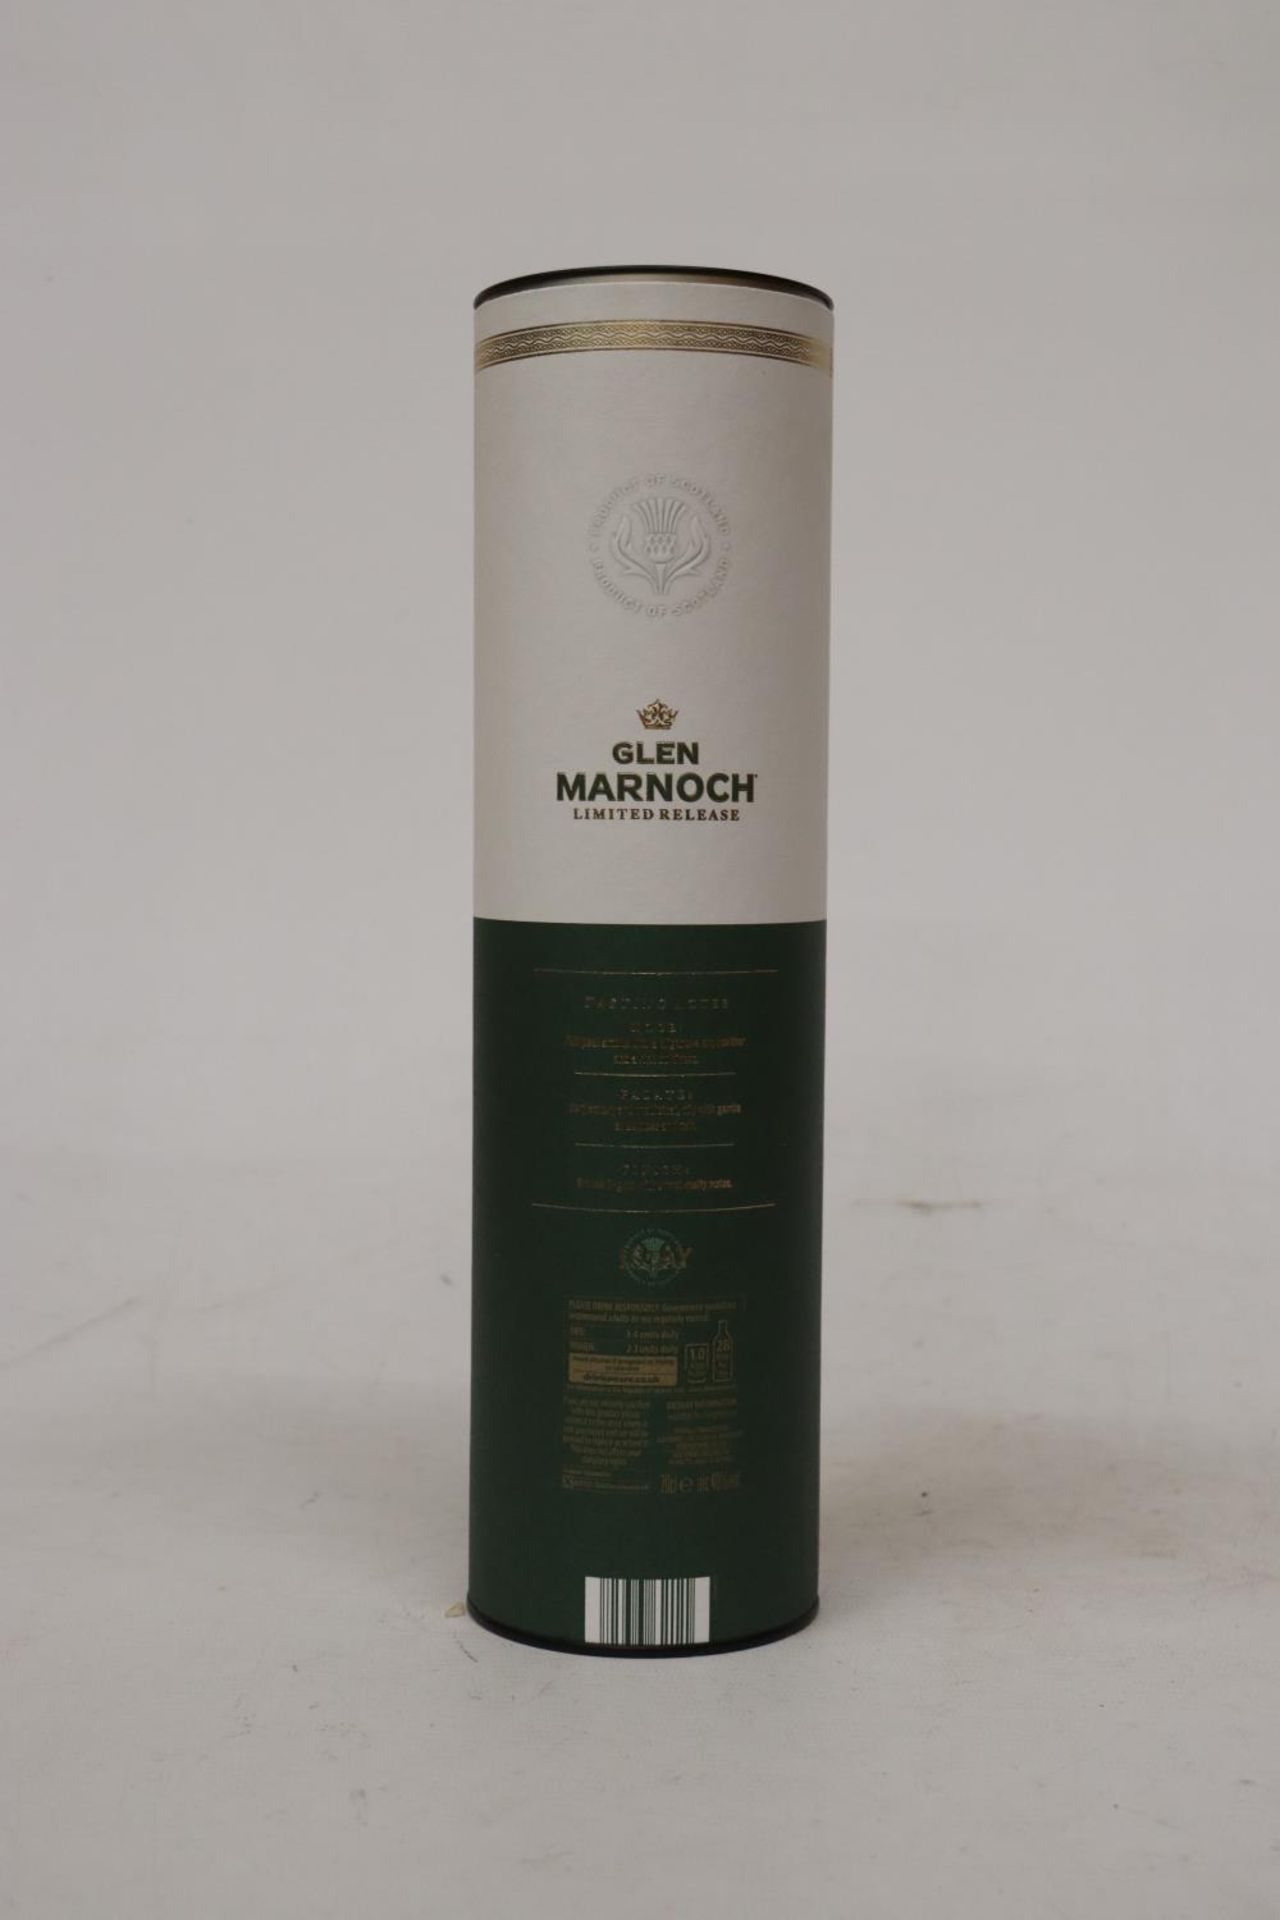 A BOTTLE OF GLENMARNOCH ISLAY LIMITED RELEASE WHISKY, BOXED - Image 4 of 4